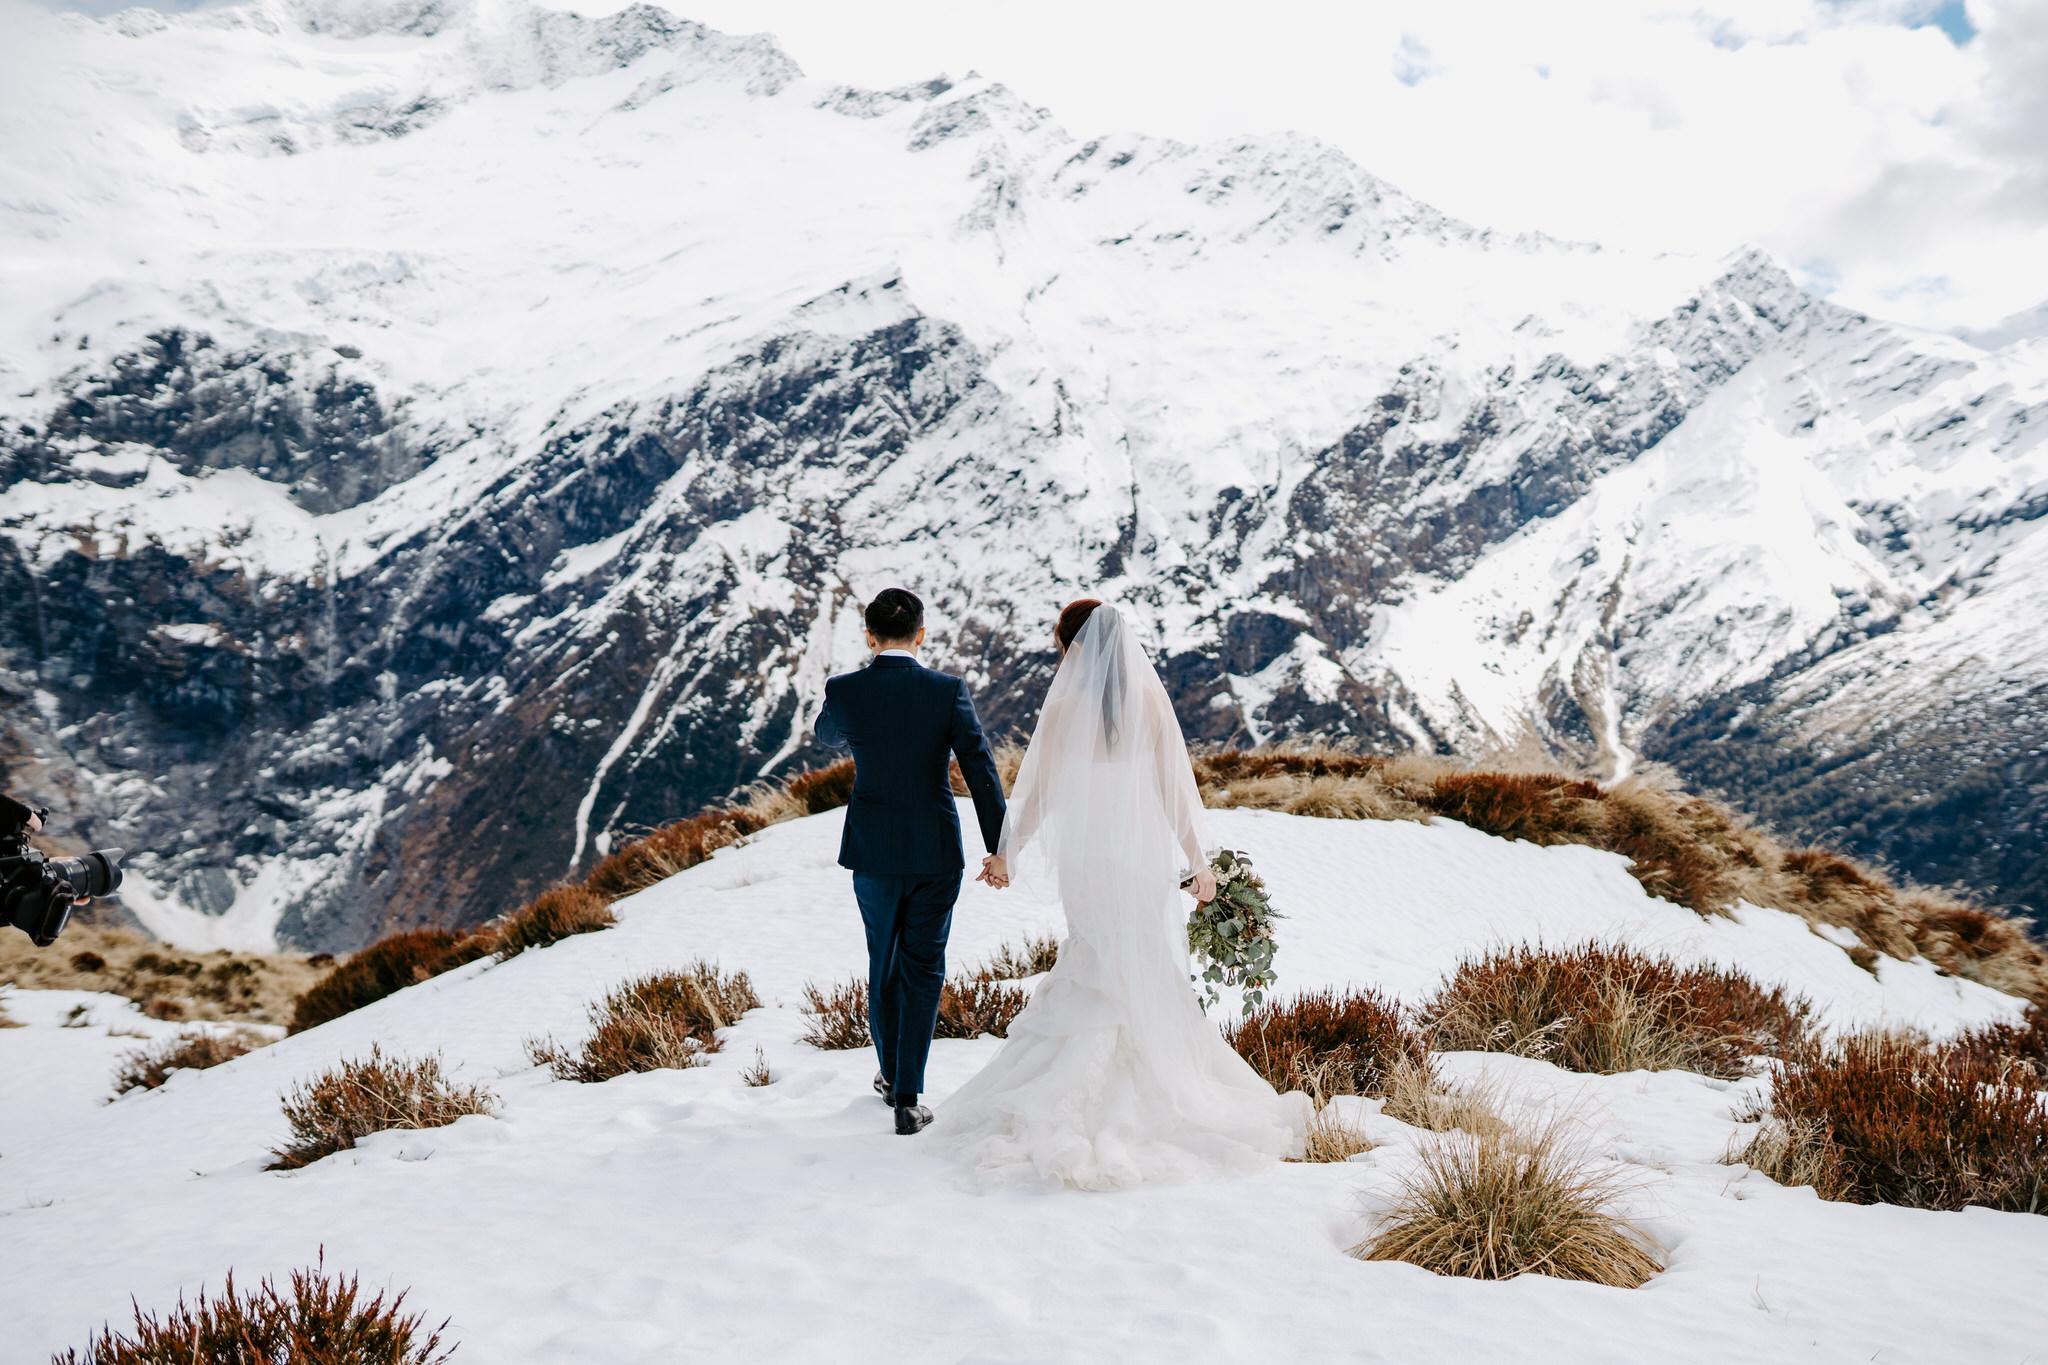 A picture of a newly married couple standing on a rocky mountain peak, surrounded by the stunning natural scenery of New Zealand. The couple is dressed in their wedding attire, with the bride wearing a white wedding dress and the groom wearing a black suit. They are holding hands, taking in the breathtaking views of the mountains around them.